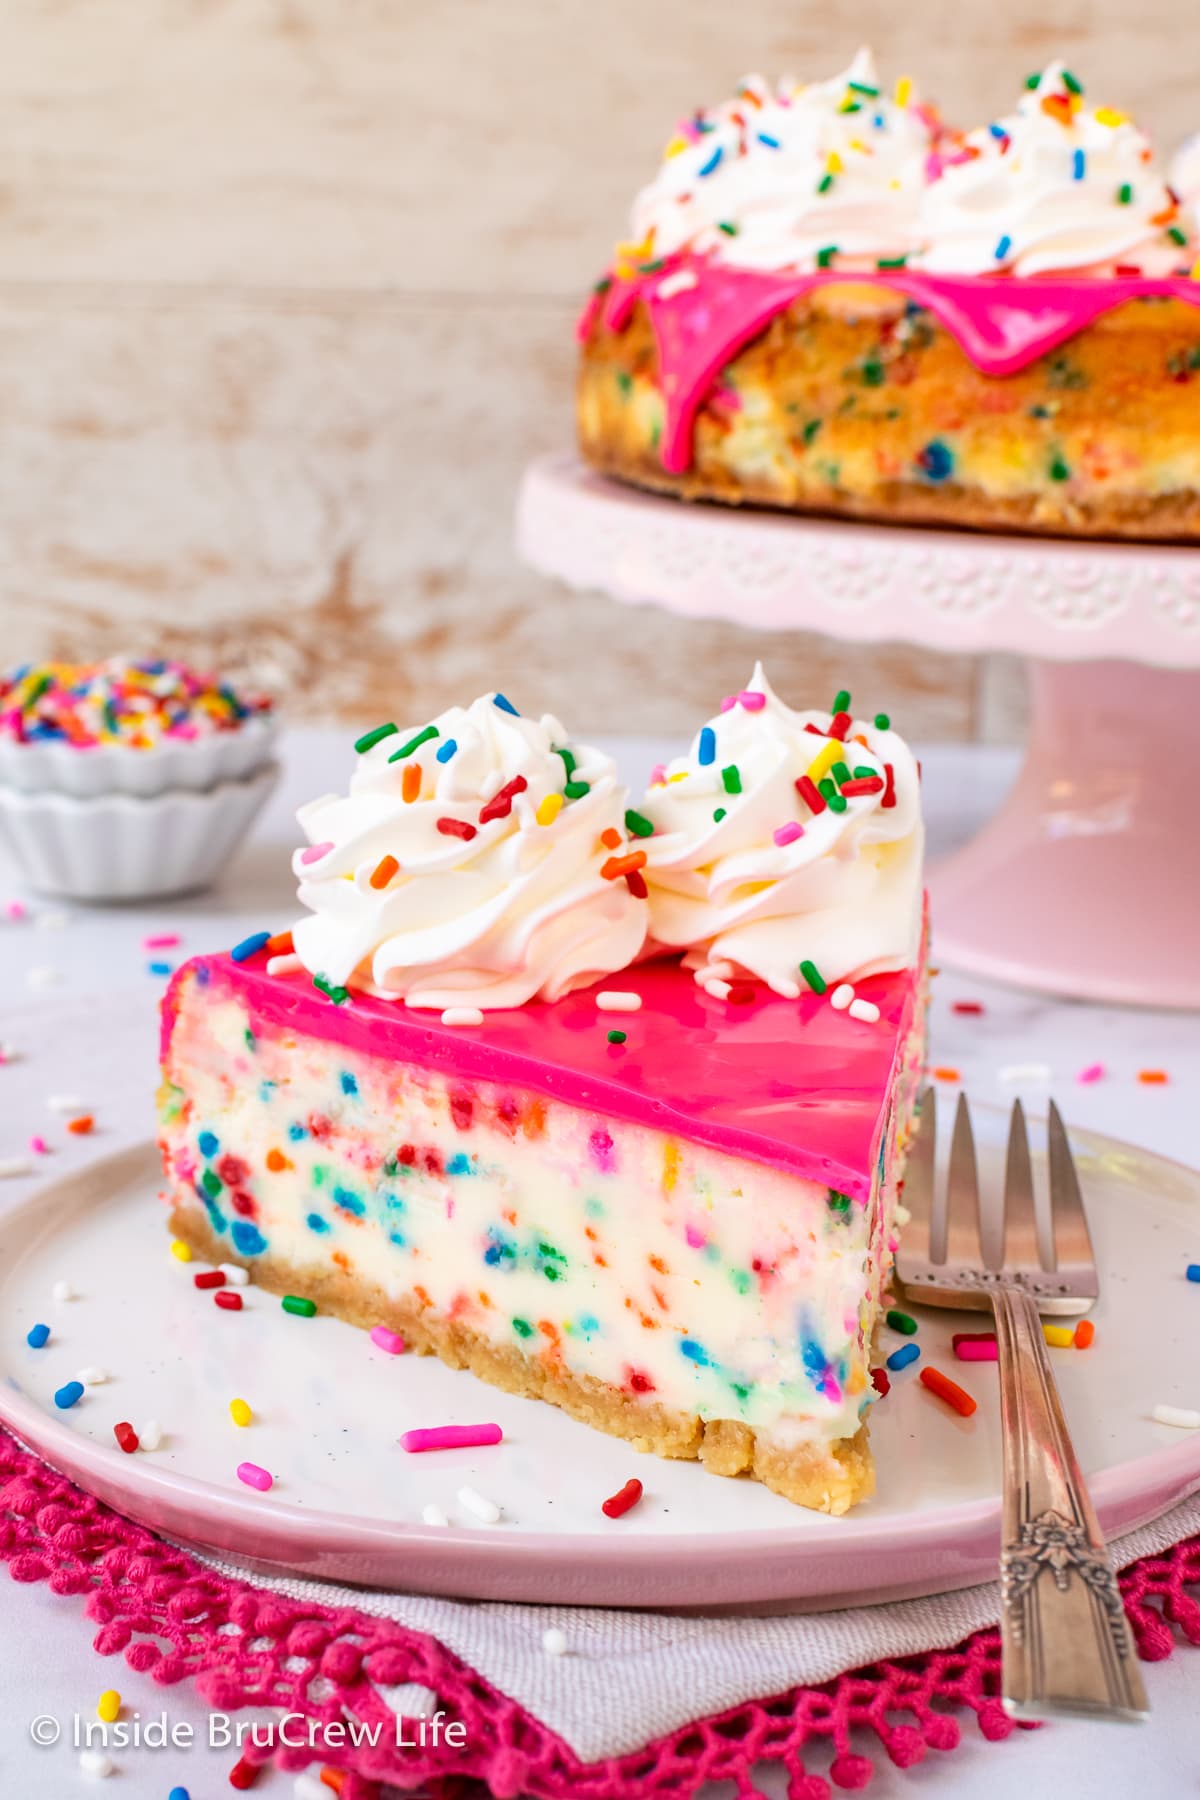 A slice of confetti cheesecake with pink chocolate on a plate.